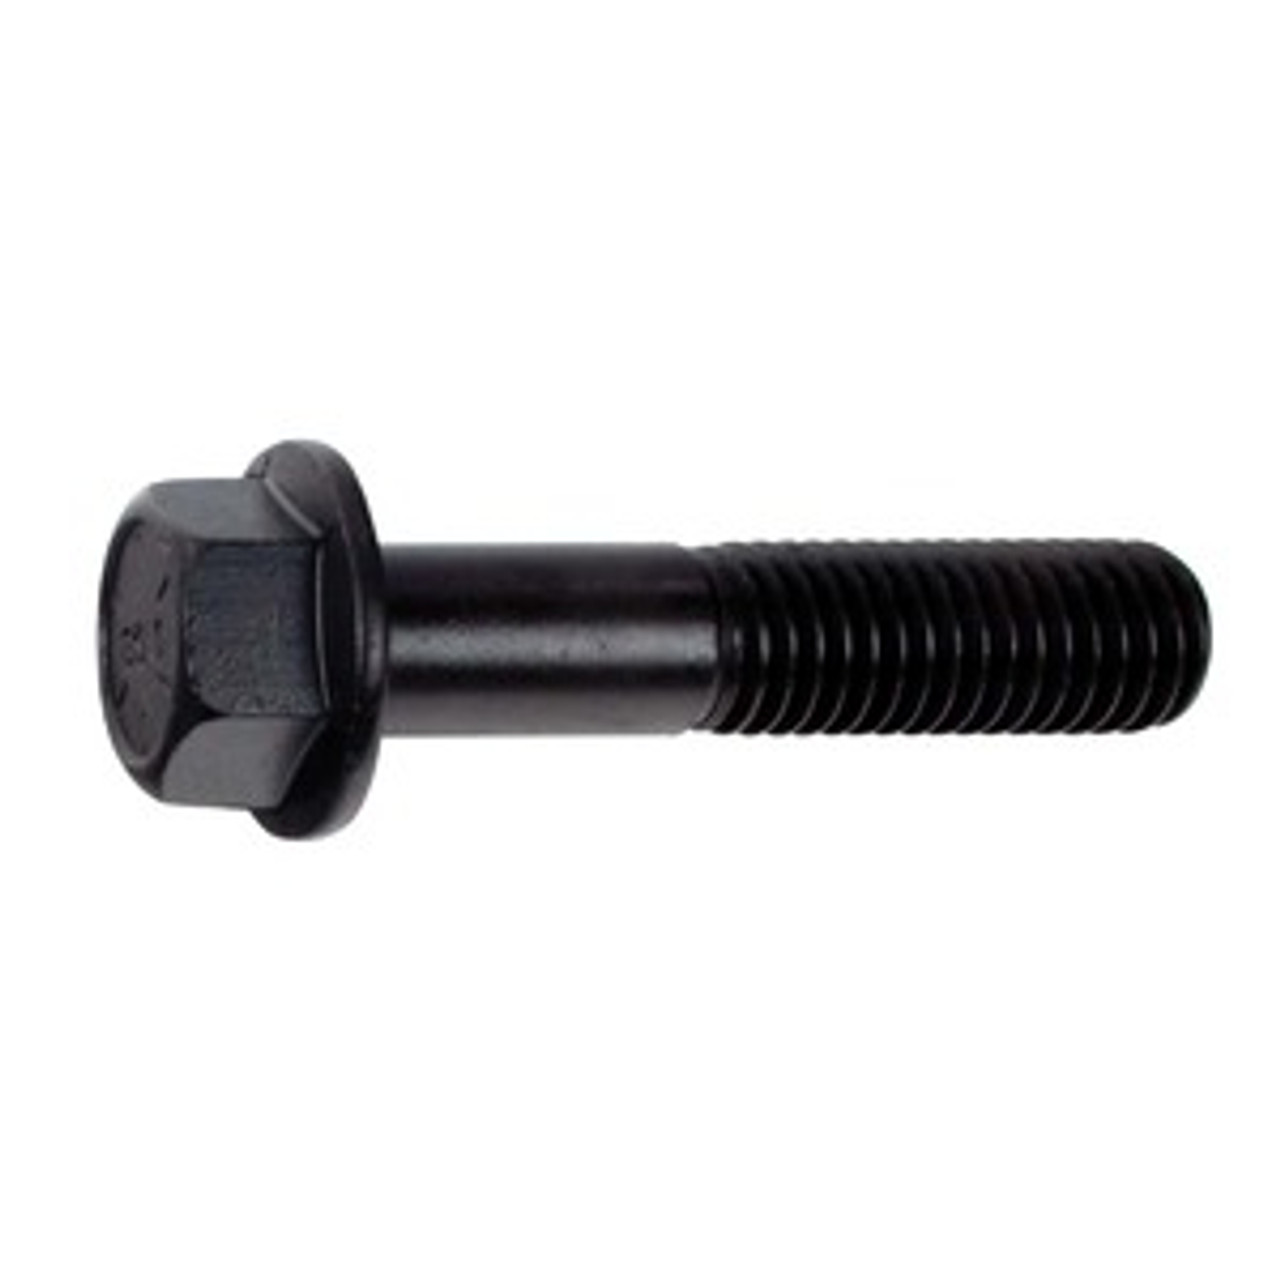 Hex Flange Frame Bolts
Grade 8
1/2"-20 x 1"
S.A.E. Fine Thread
Threaded To The Head
Phosphate
10 Per Box
Click Next Image For Bolt Size Chart